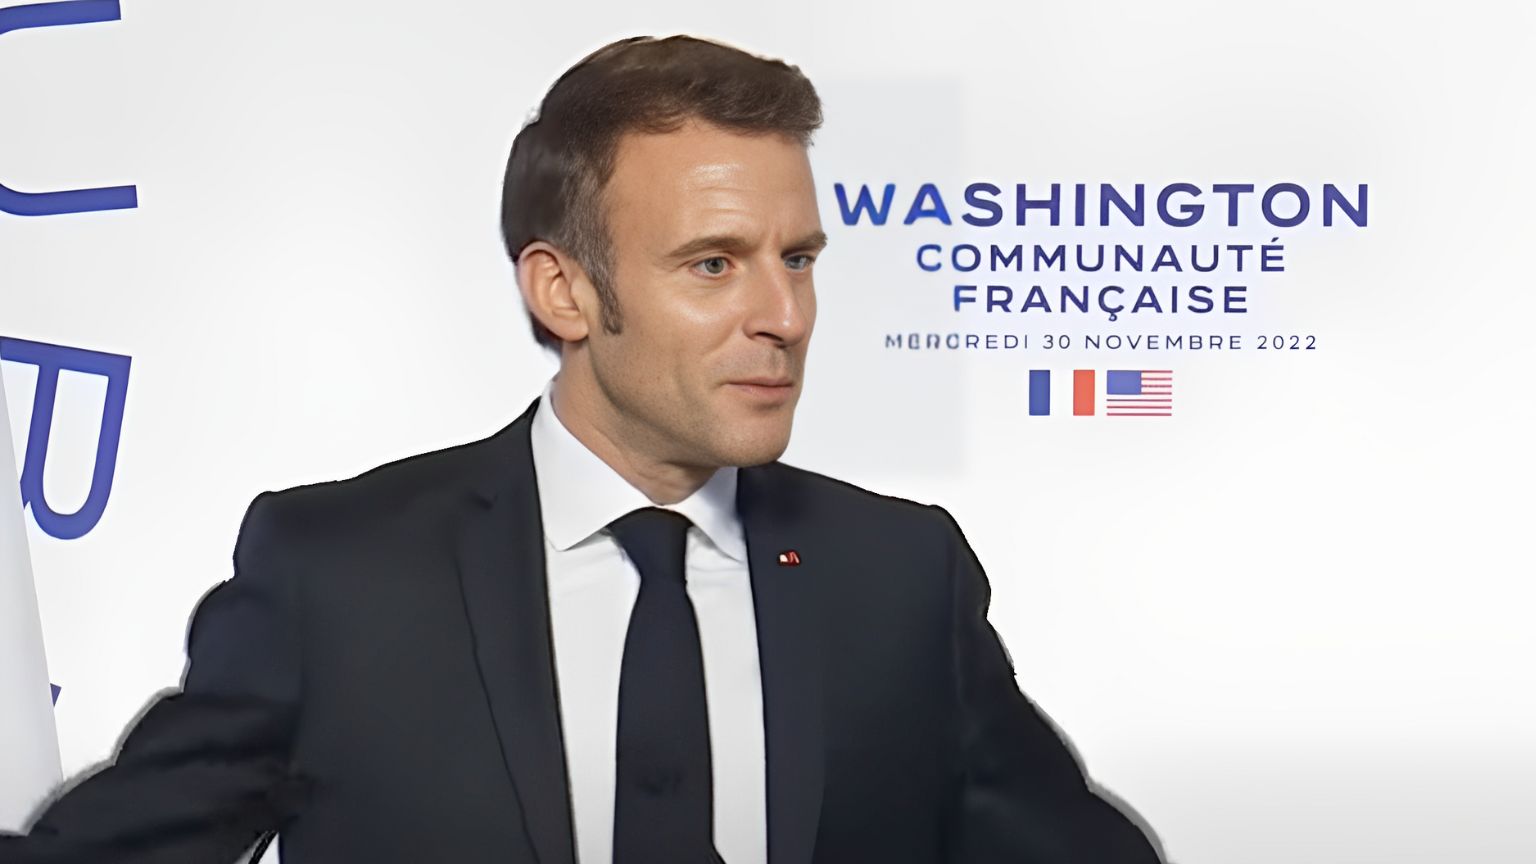 Macron wants more Twitter censorship to stop people saying “crazy things” about vaccines, pandemics, and war